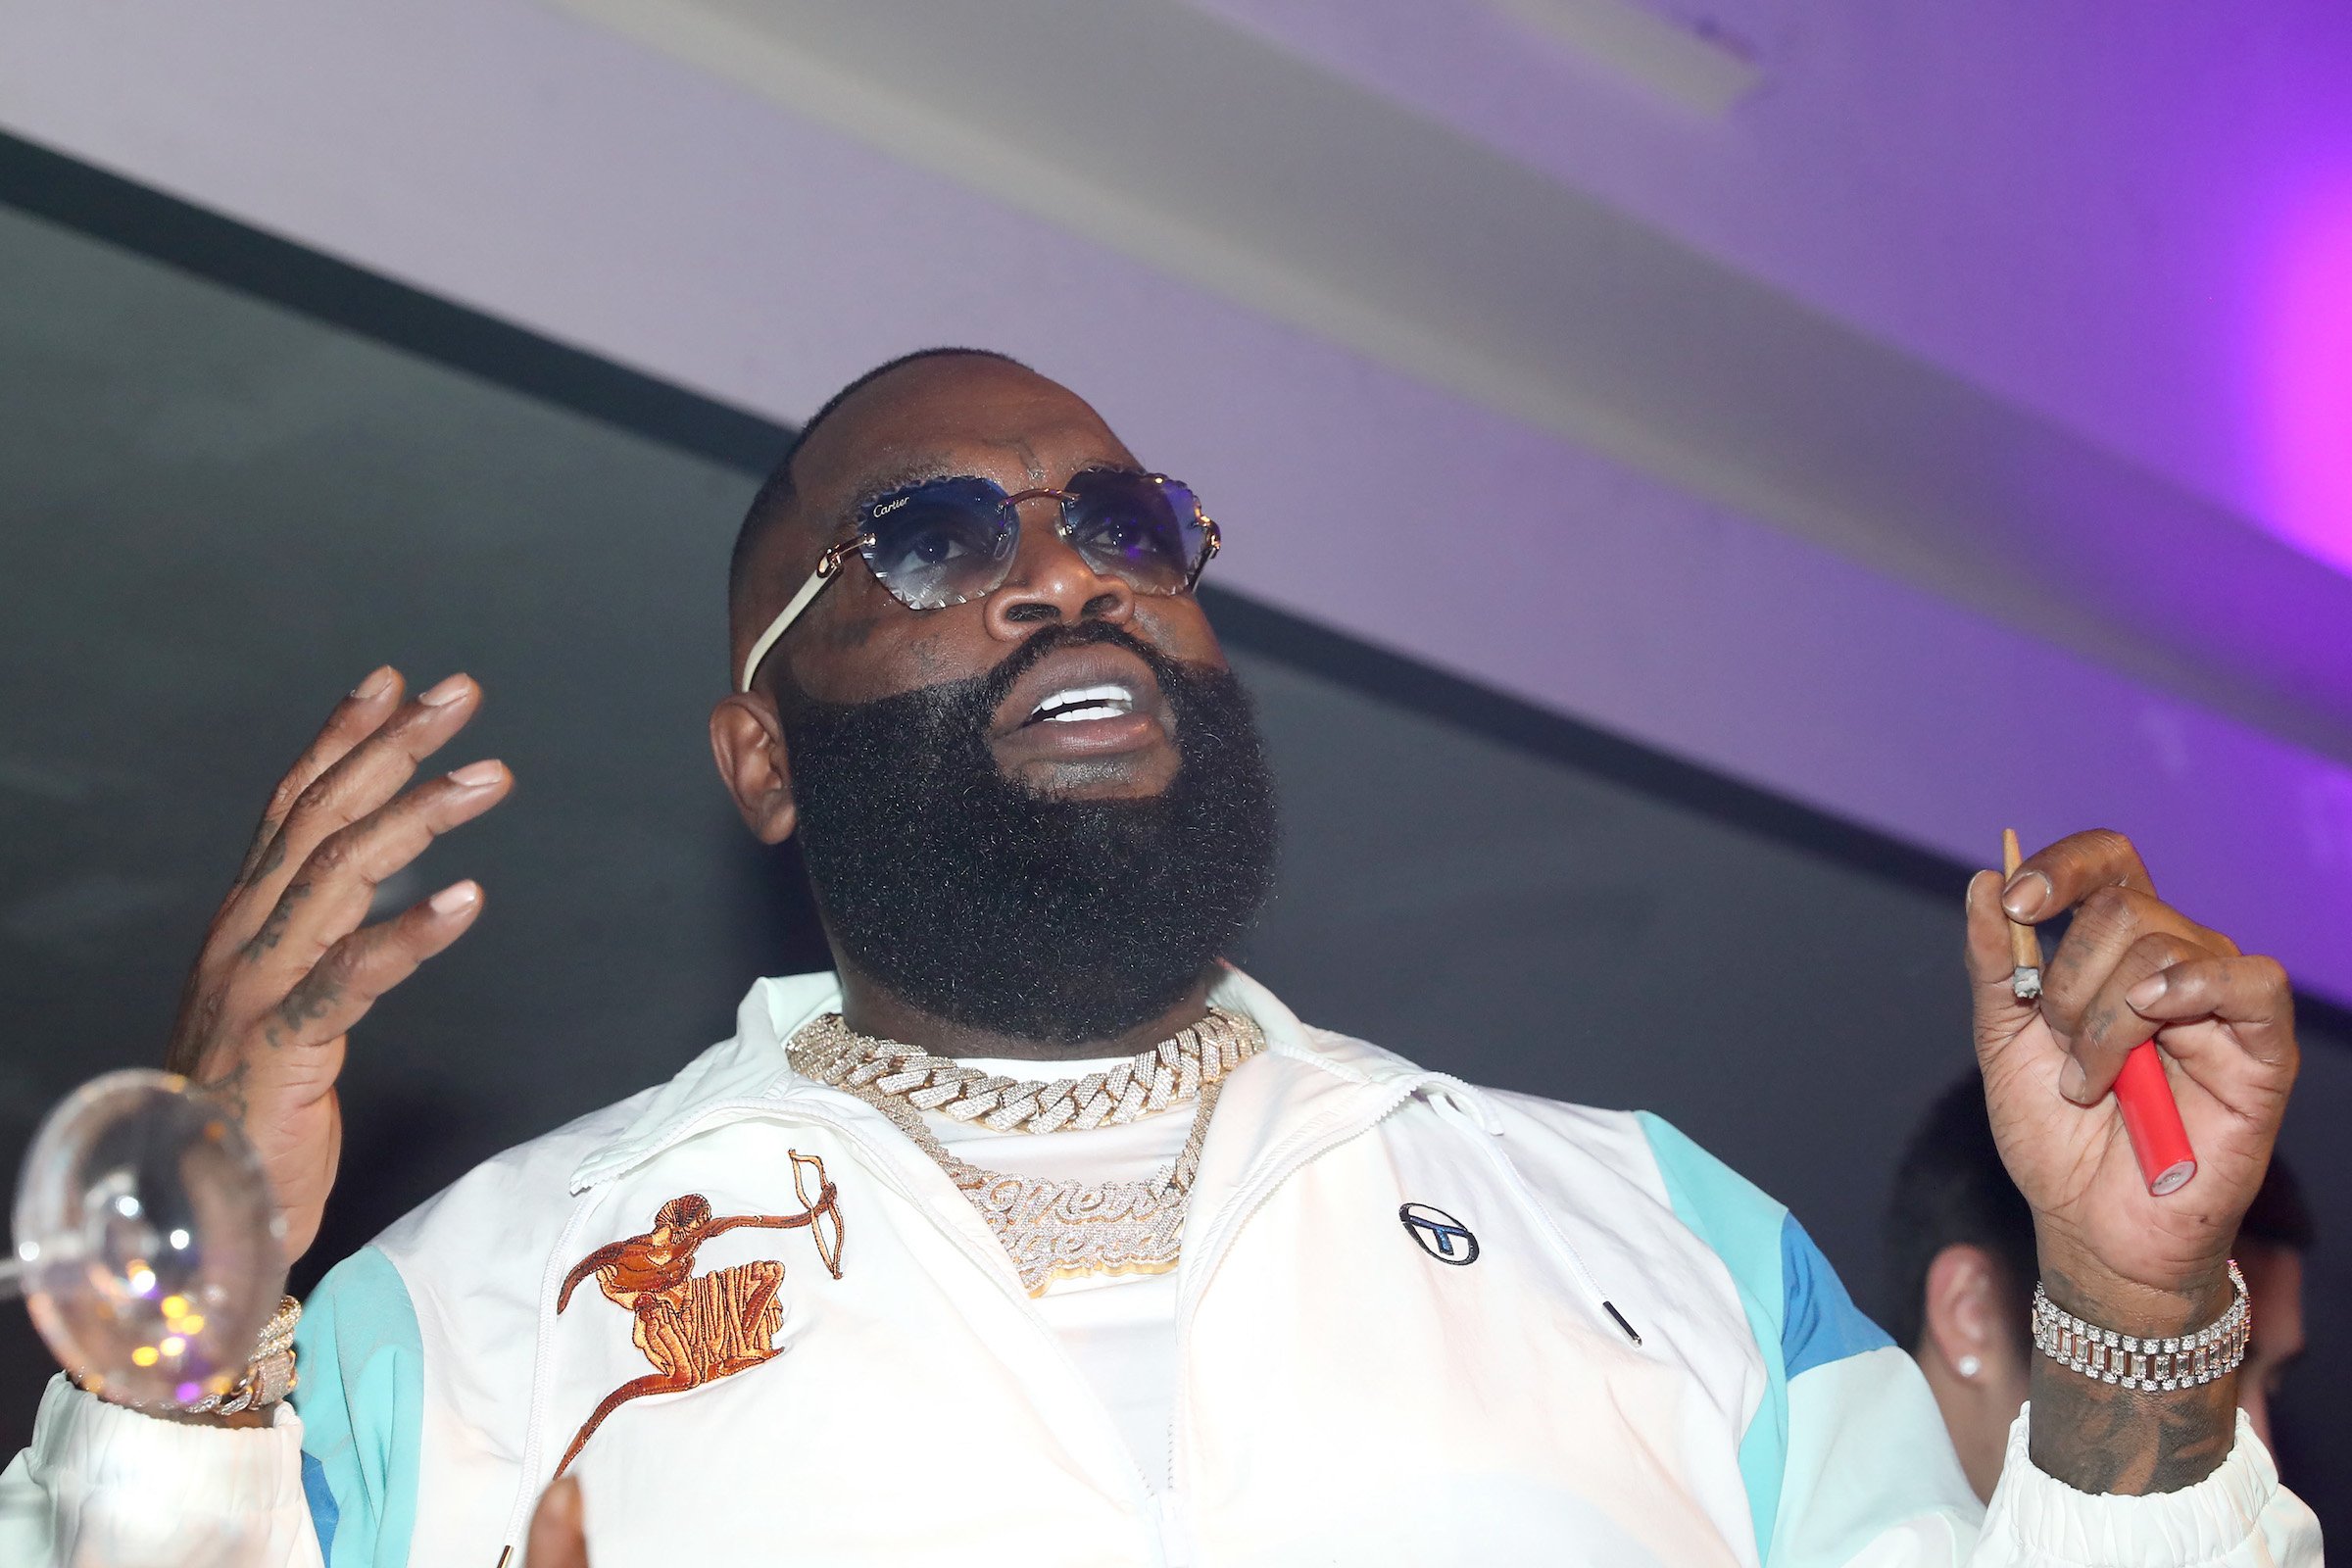 Car collector Rick Ross wearing a white jacket and smoking